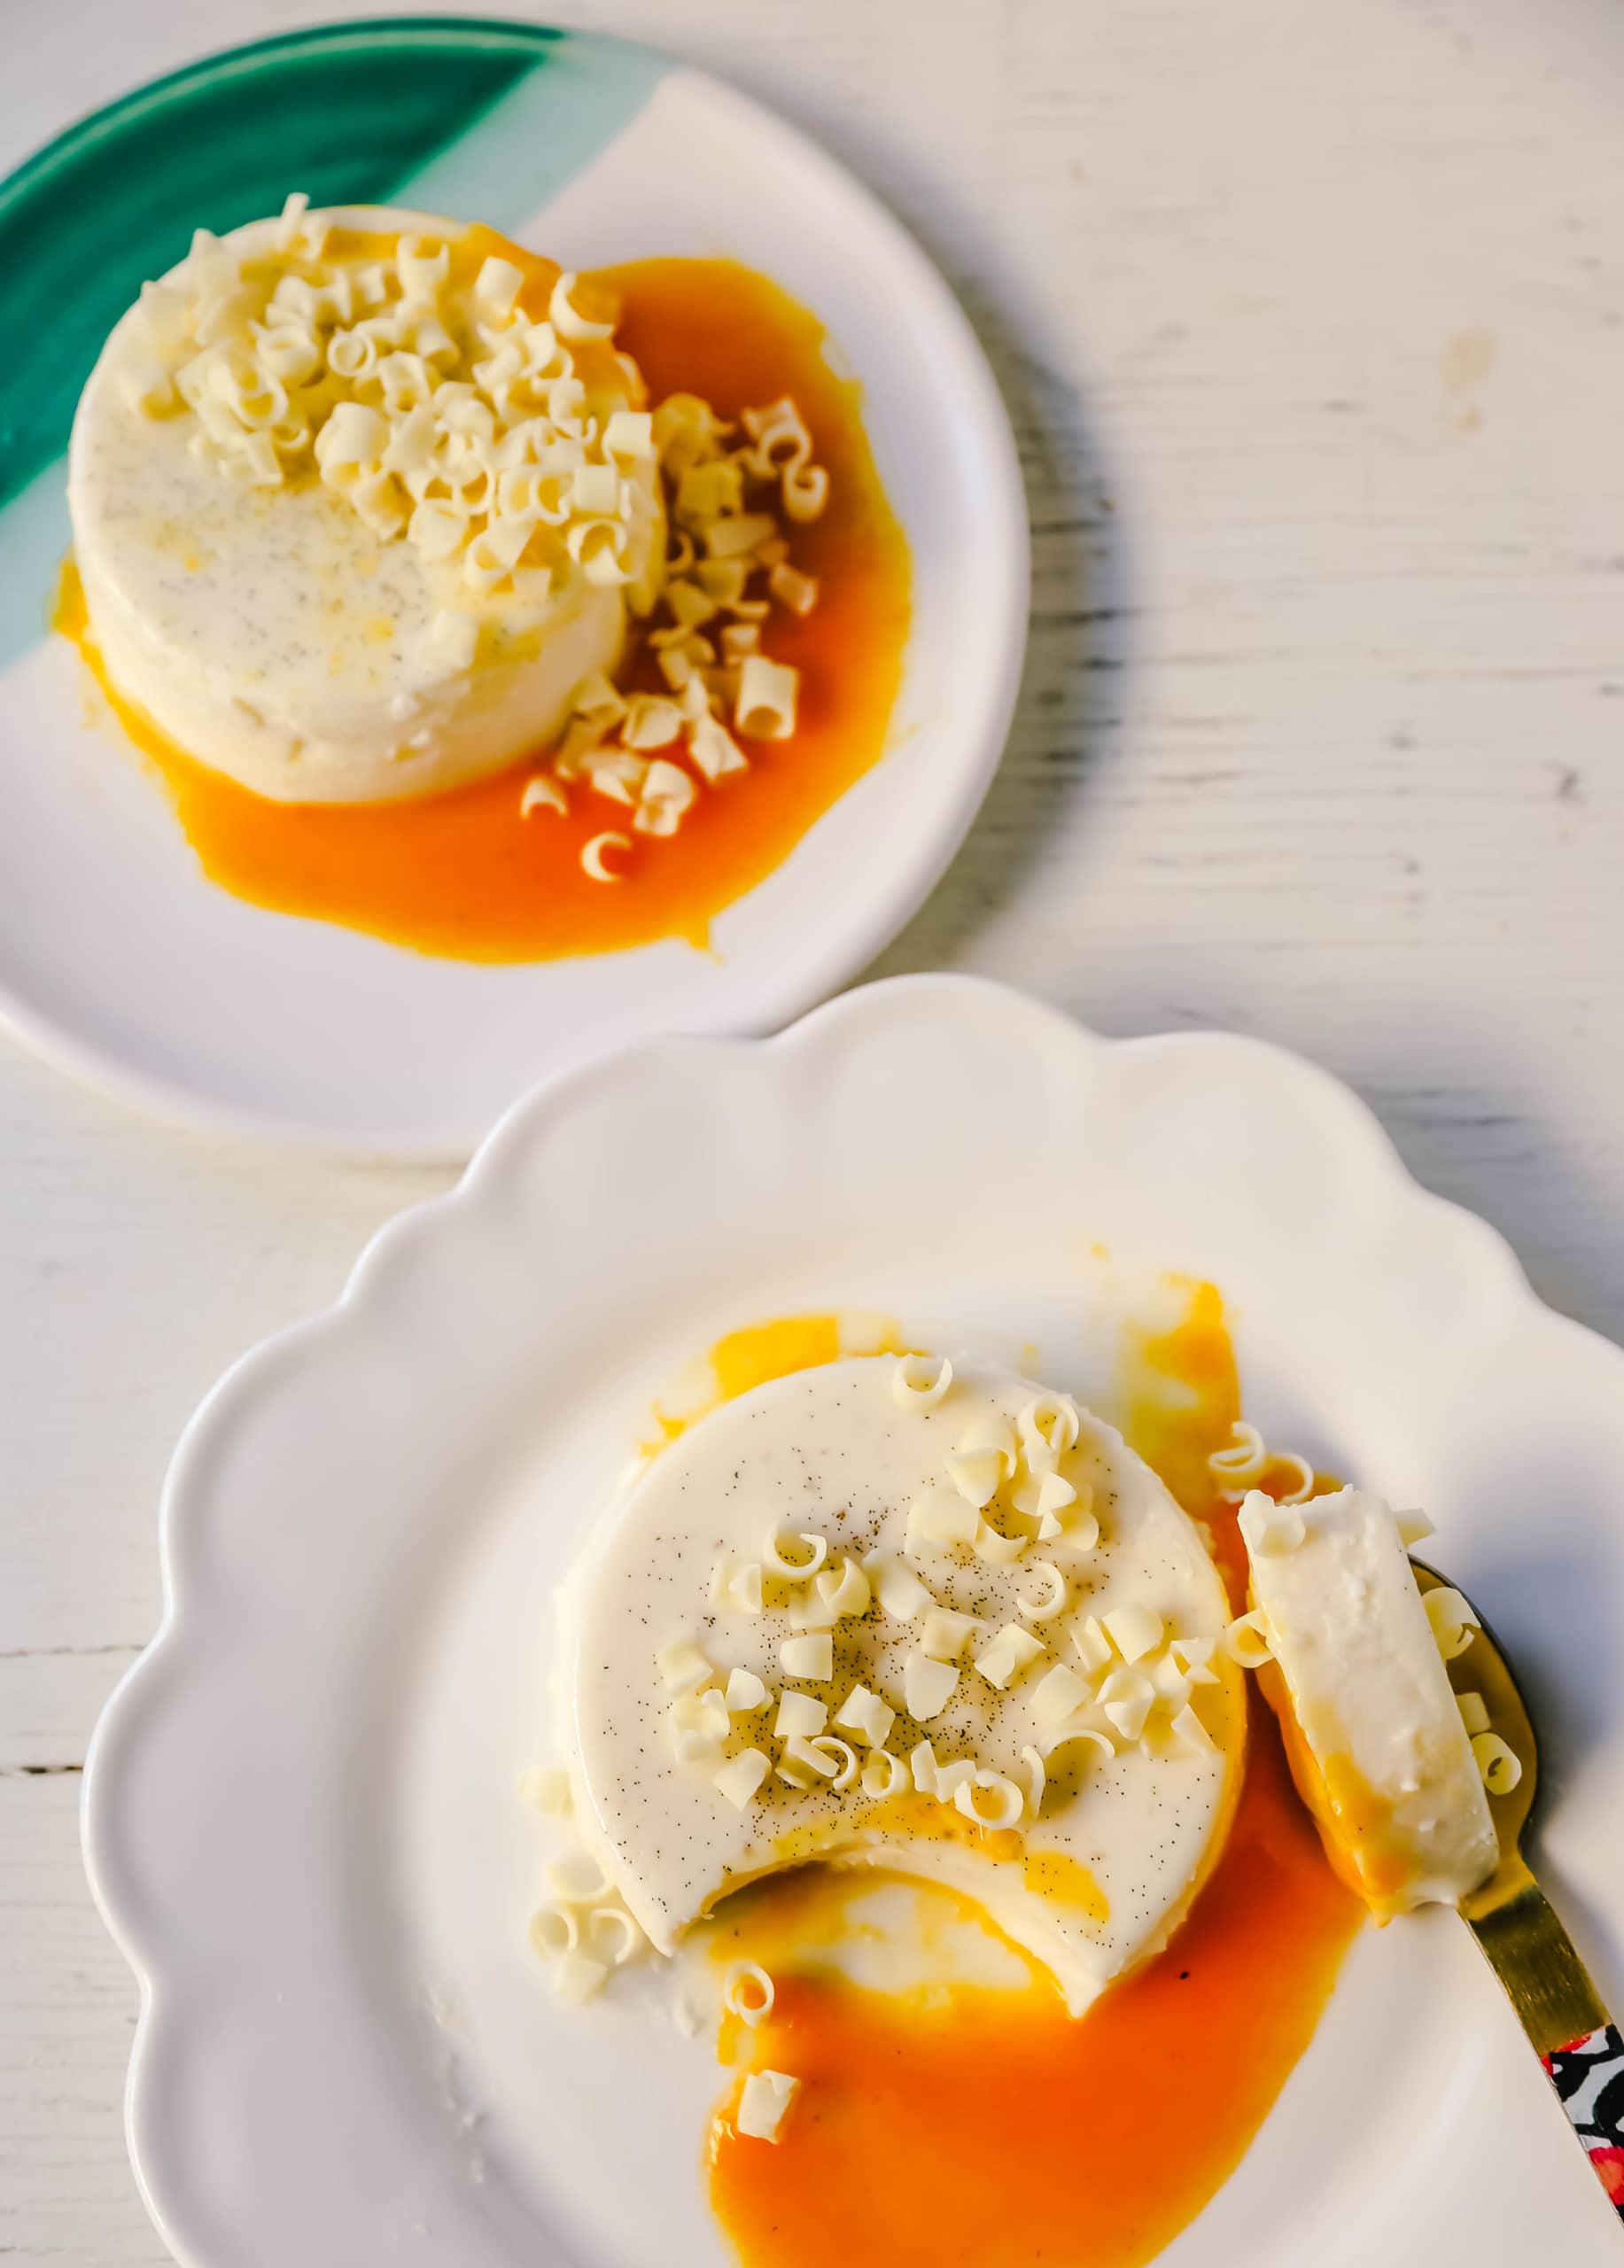 Vanilla Panna Cotta with Passion Fruit Coulis